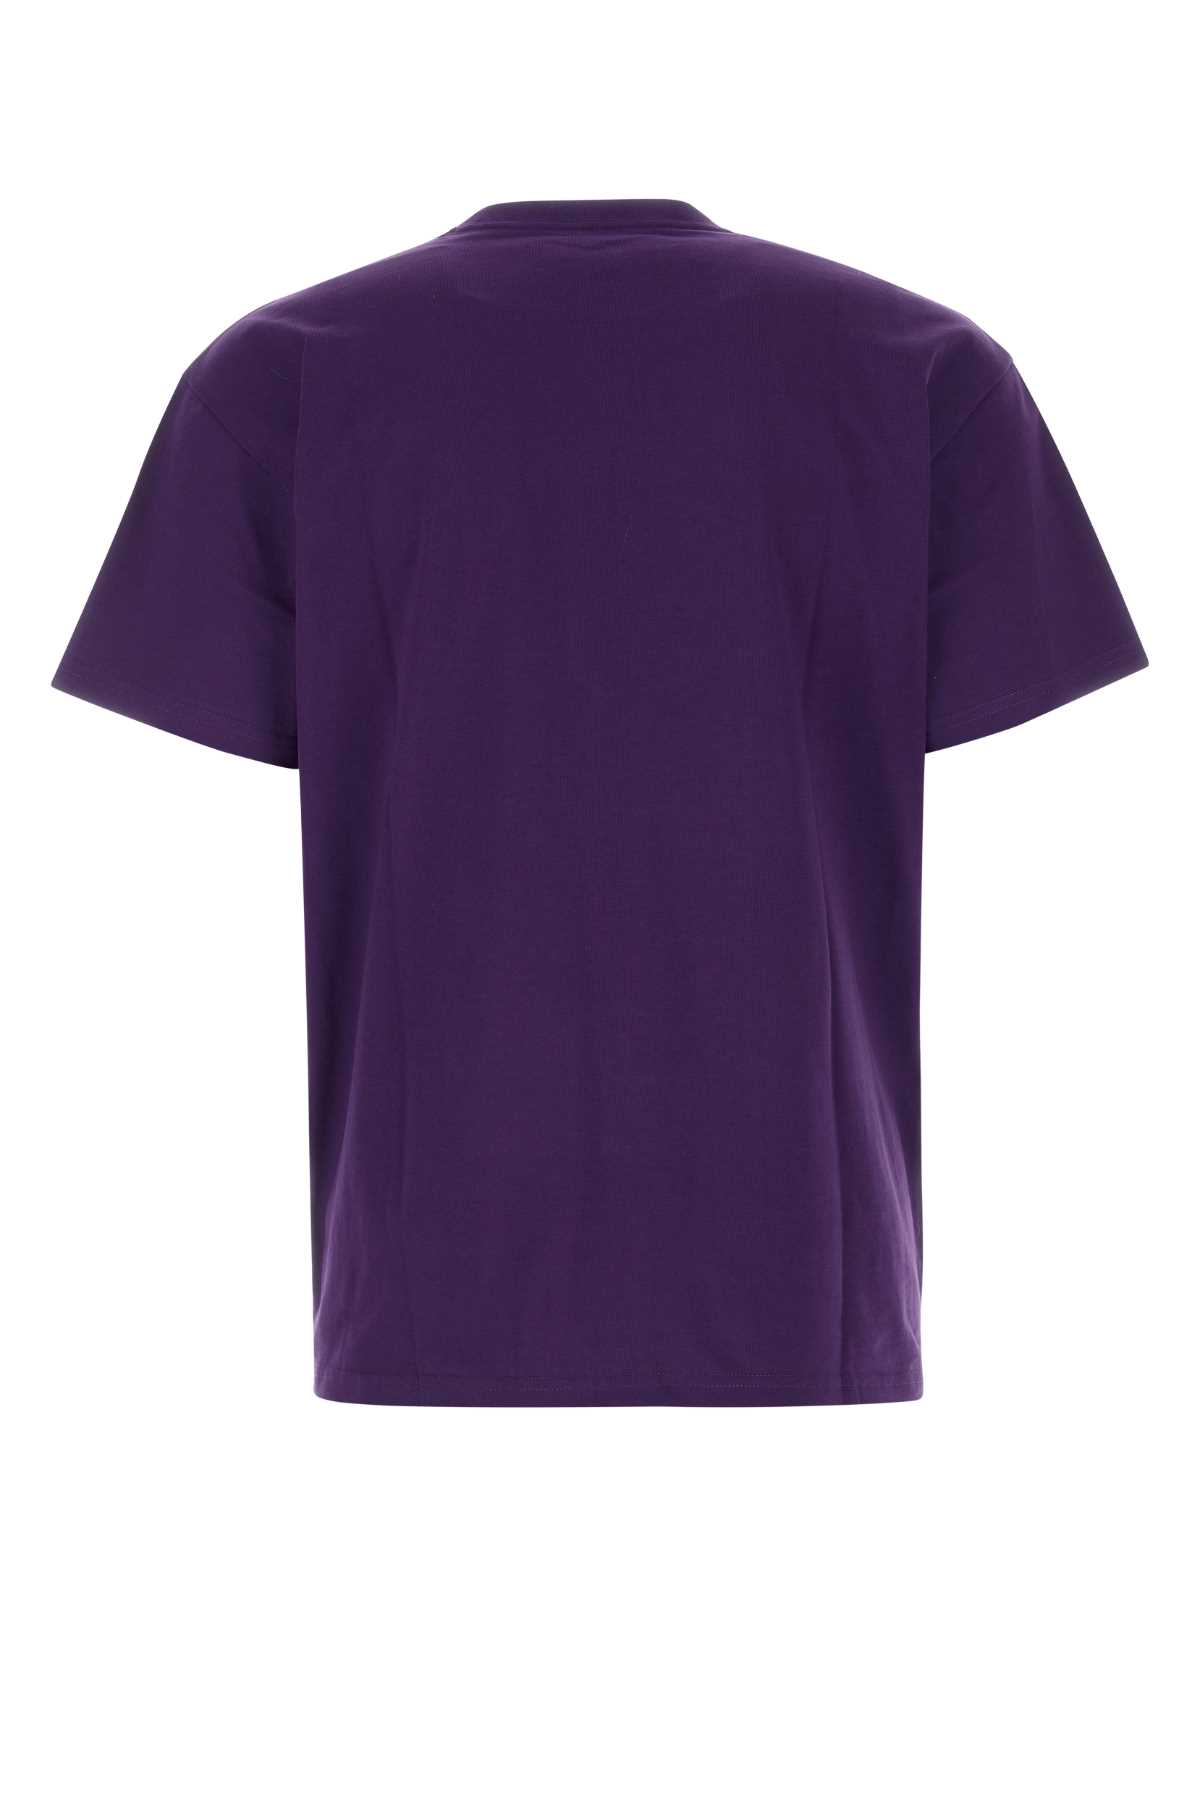 Carhartt Purple Cotton S/s Chasse T-shirt In Gold